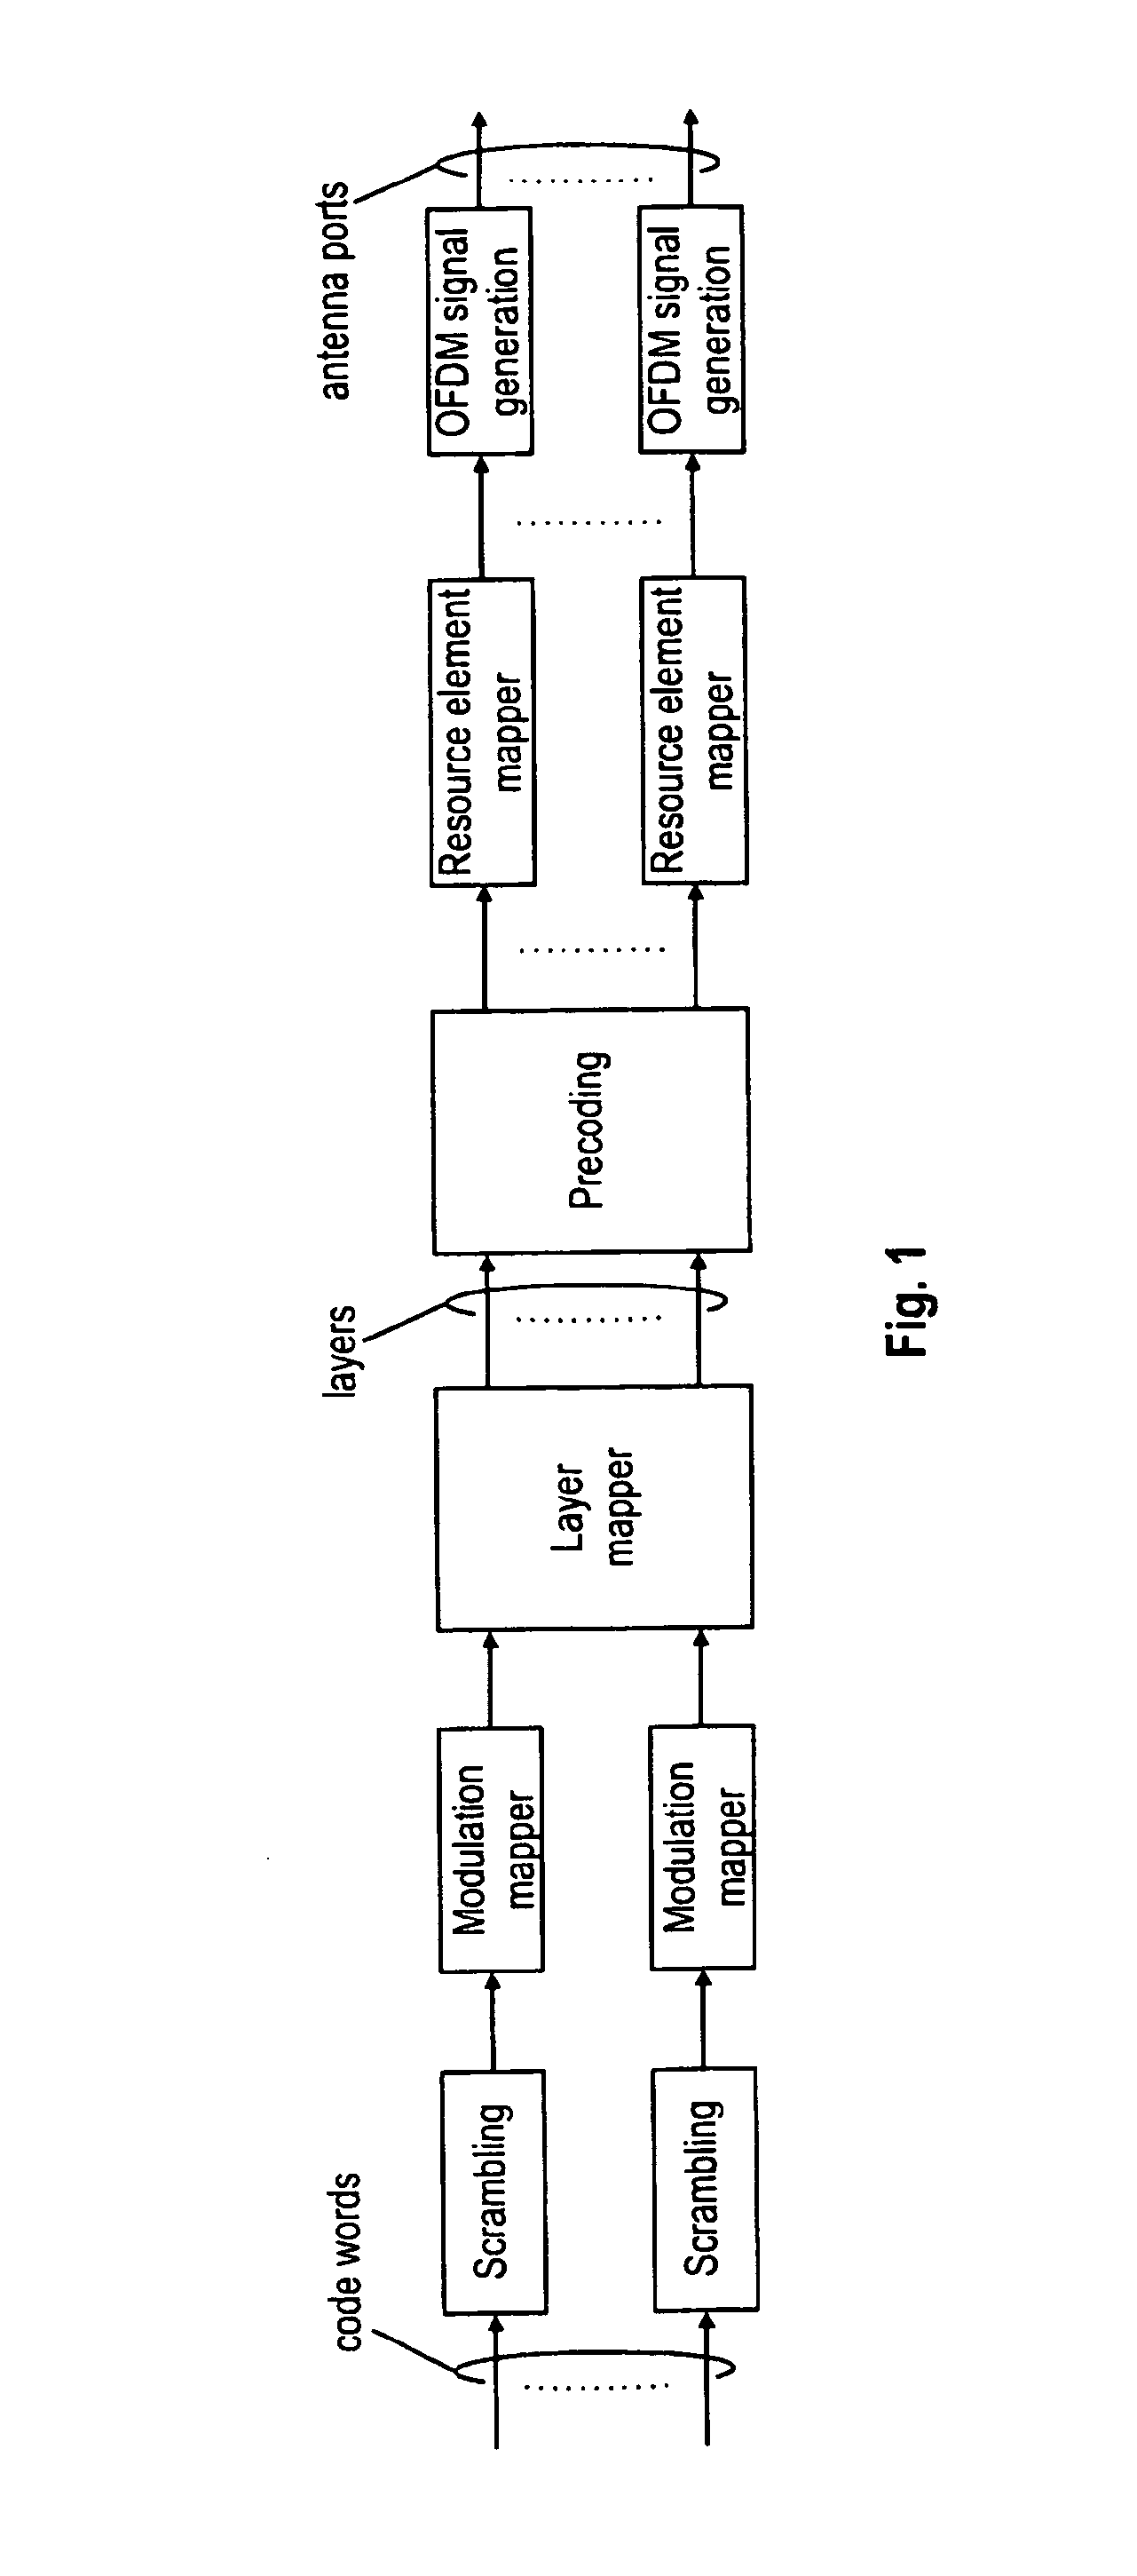 Retransmission mode signaling in a wireless communication system